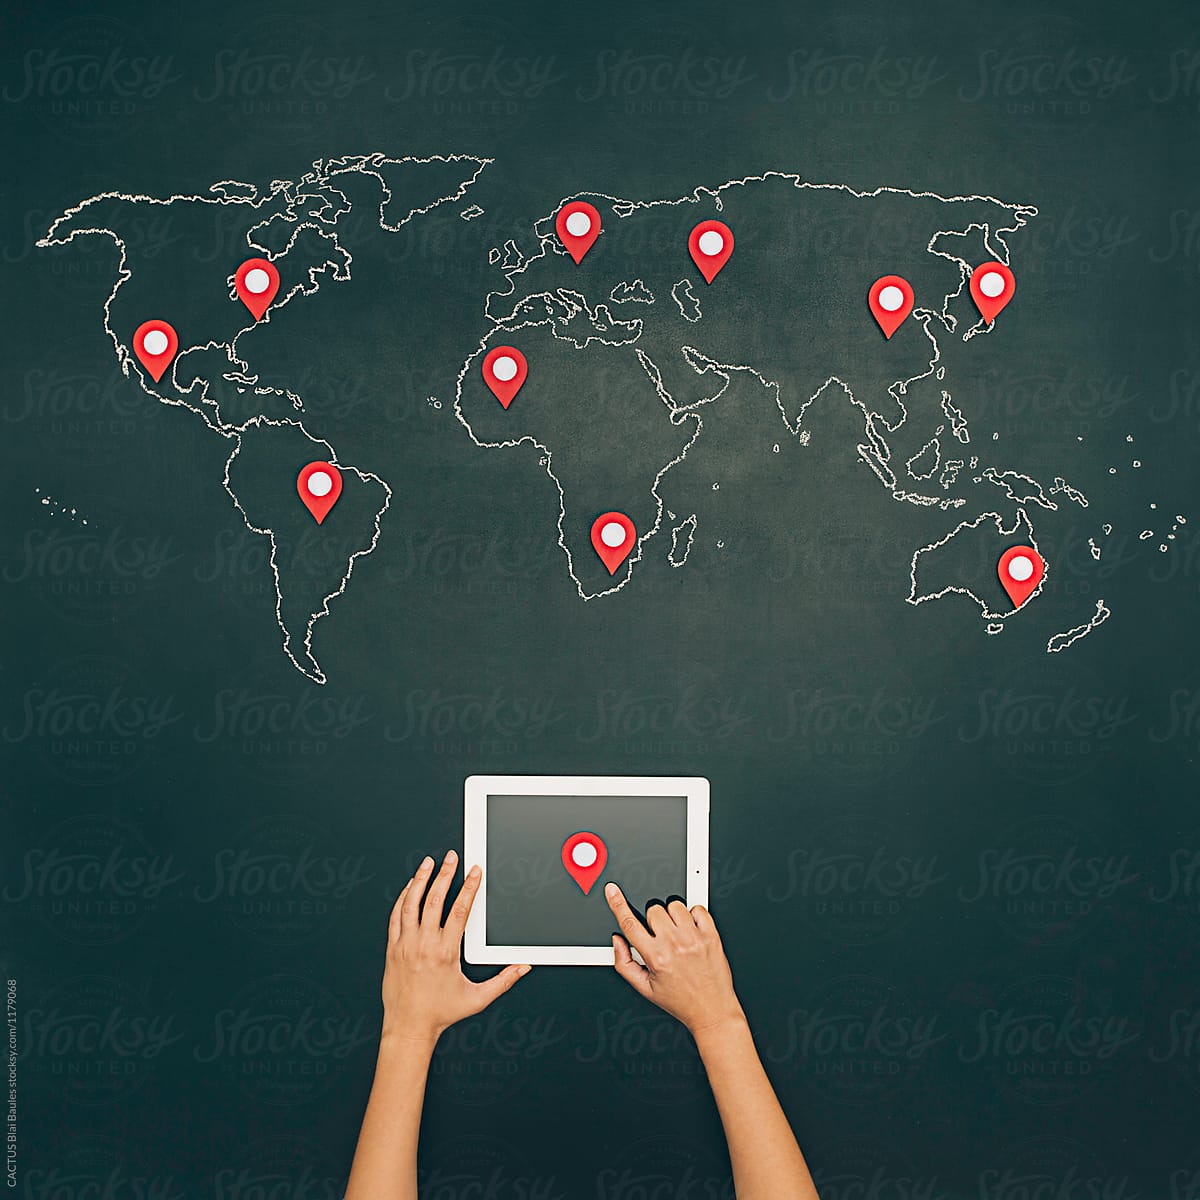 Internet search with tablet. World map on chalkboard with pins.